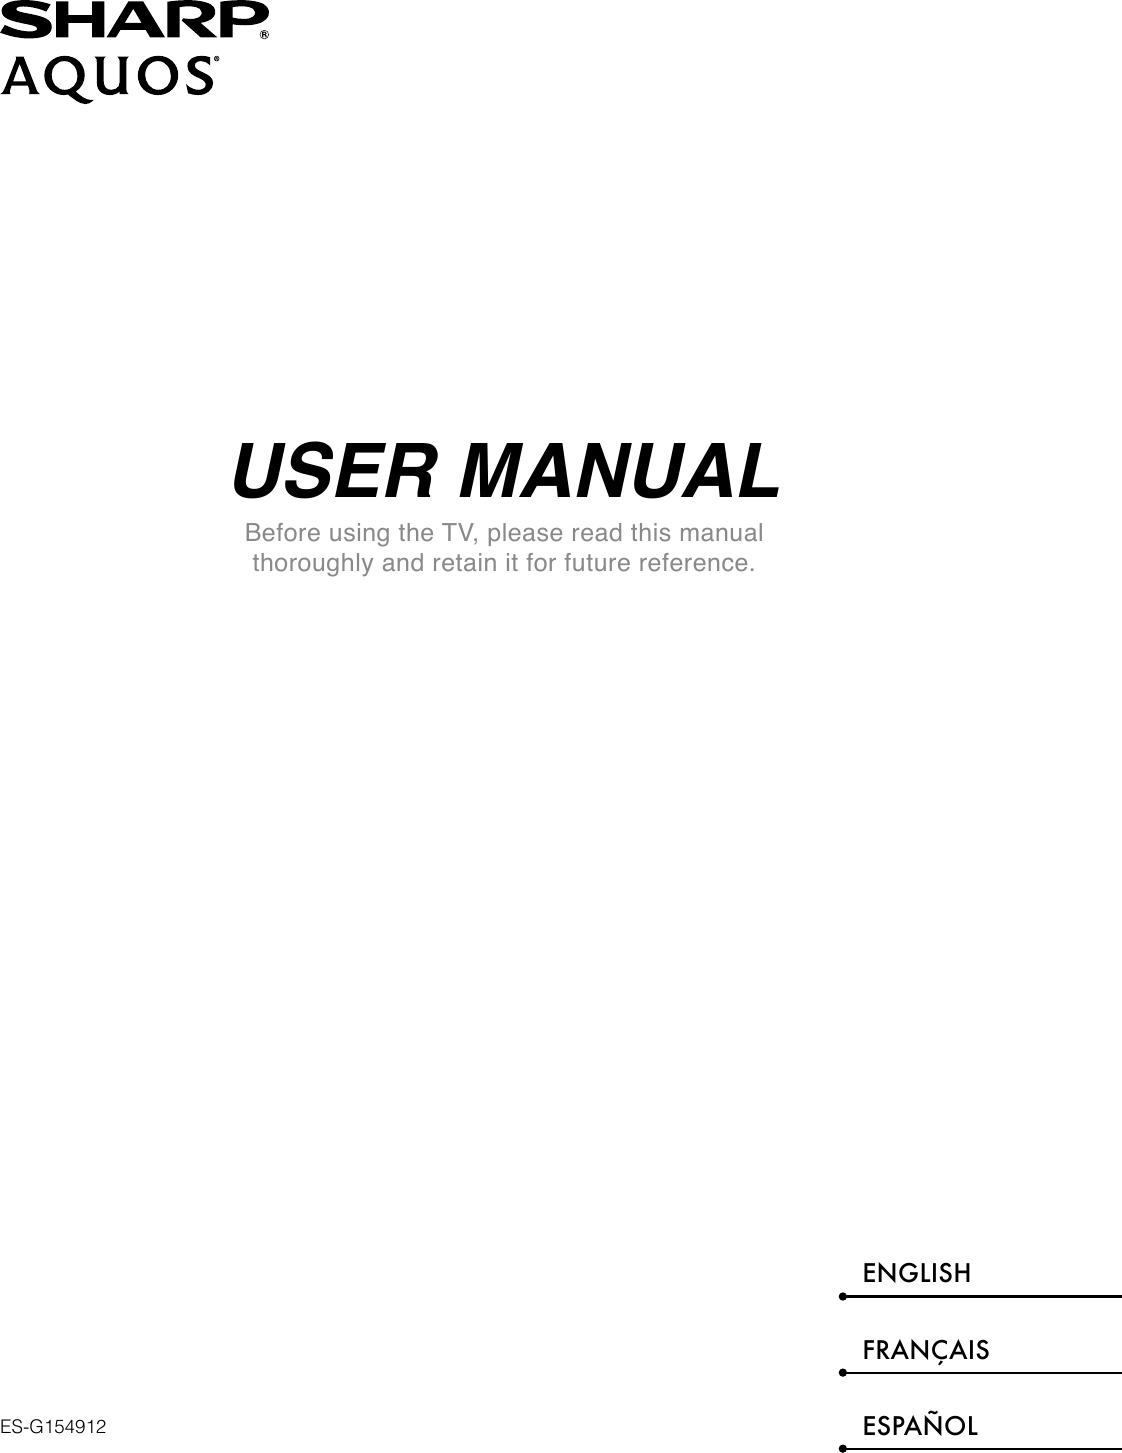 USER MANUALBefore using the TV, please read this manual thoroughly and retain it for future reference.ENGLISHFRANÇAISESPAÑOLES-G154912